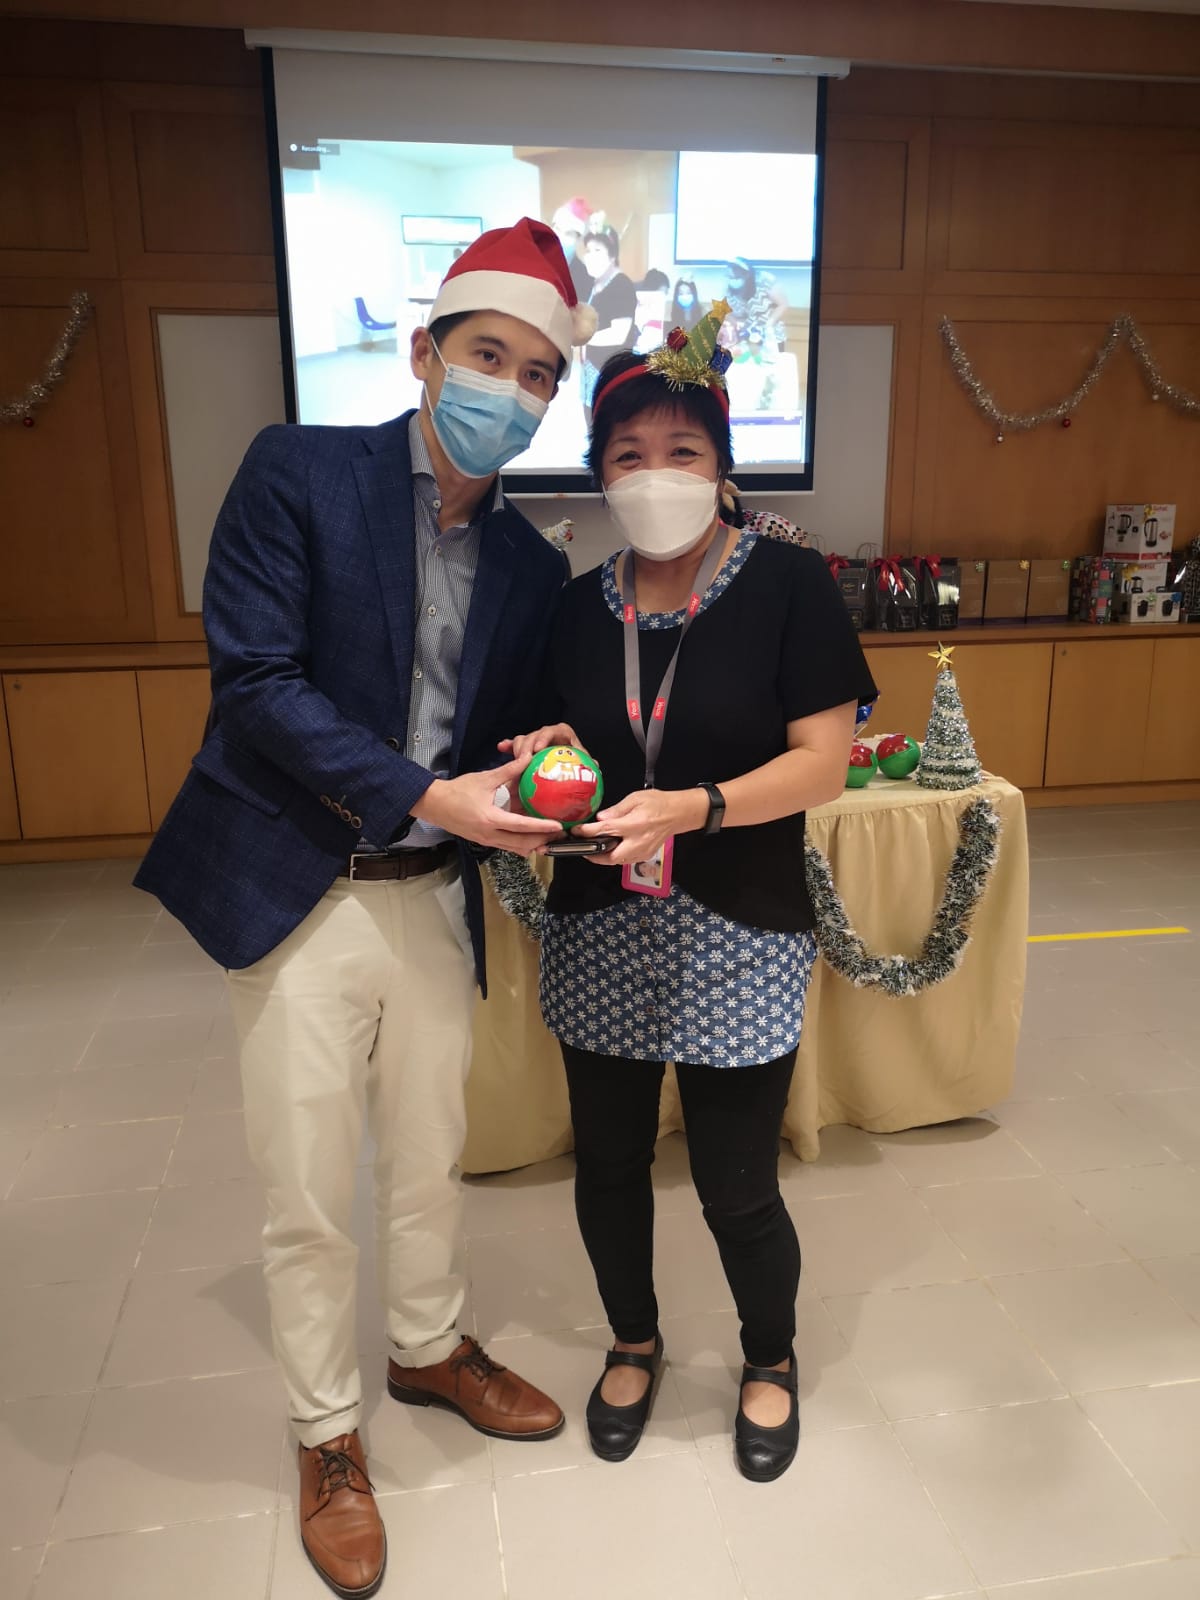 Koh with a staff member from Yeo's at the Christmas party. 